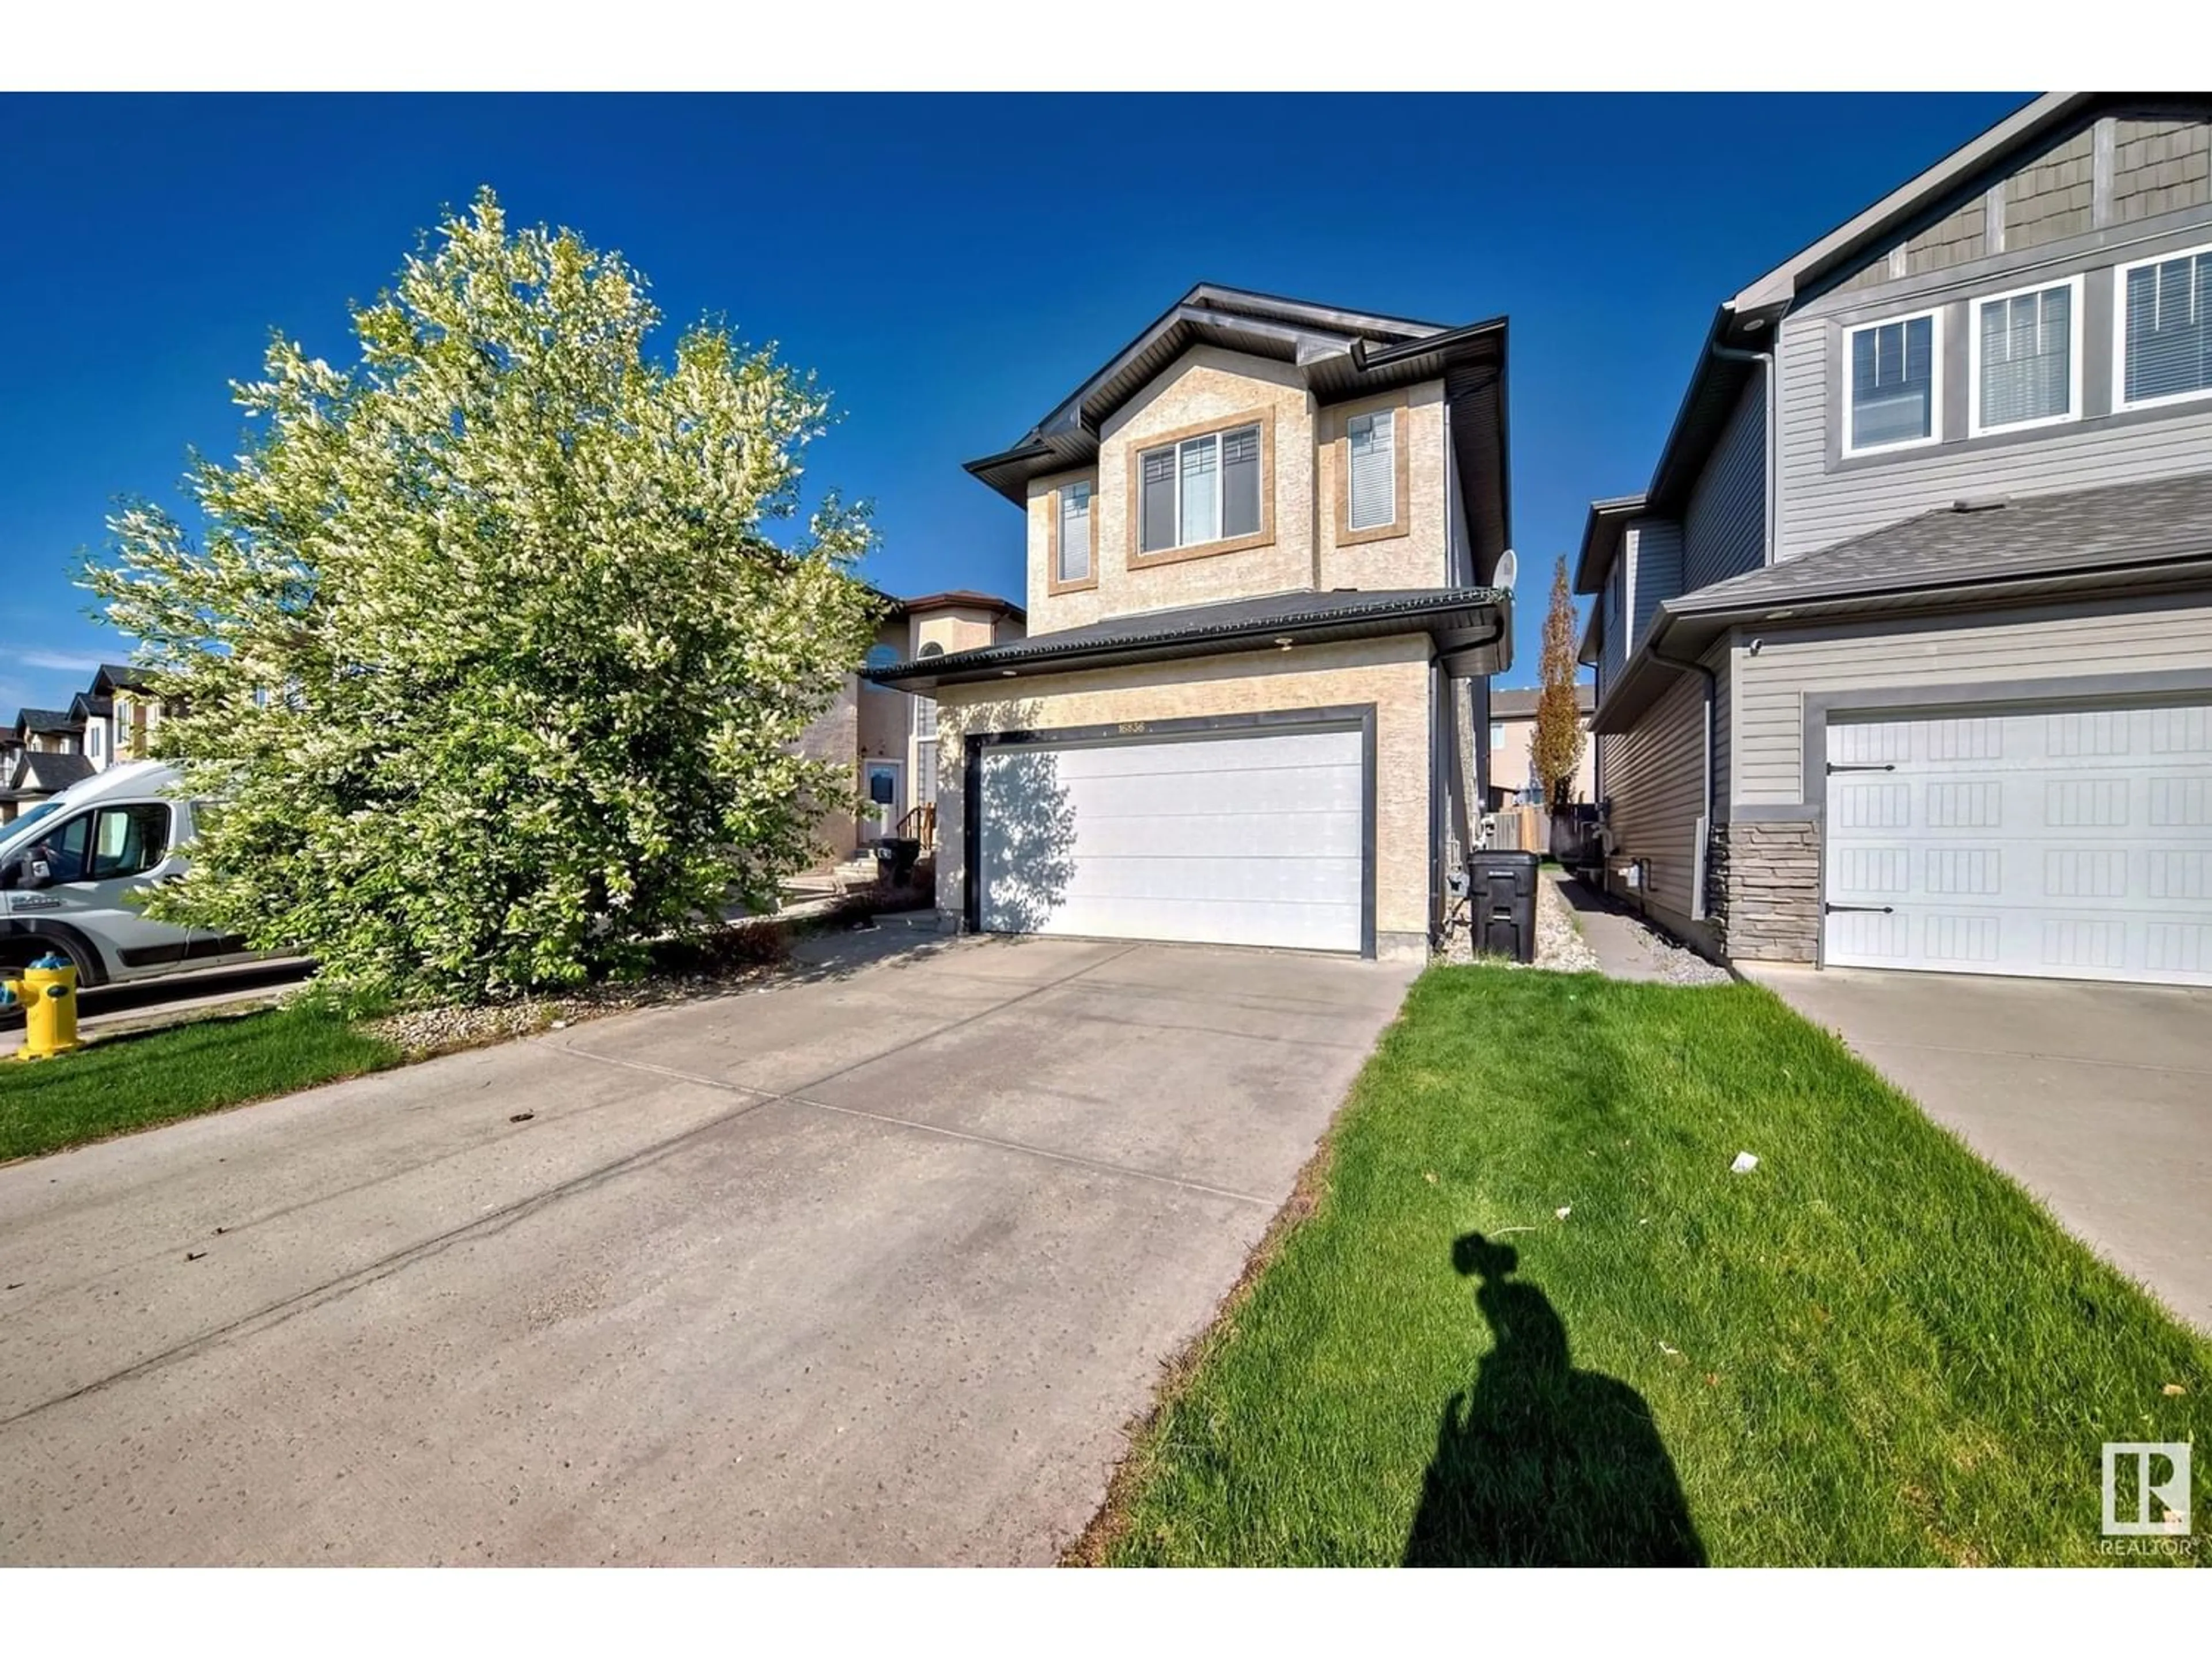 Frontside or backside of a home for 16836 54 ST NW, Edmonton Alberta T5Y0P5